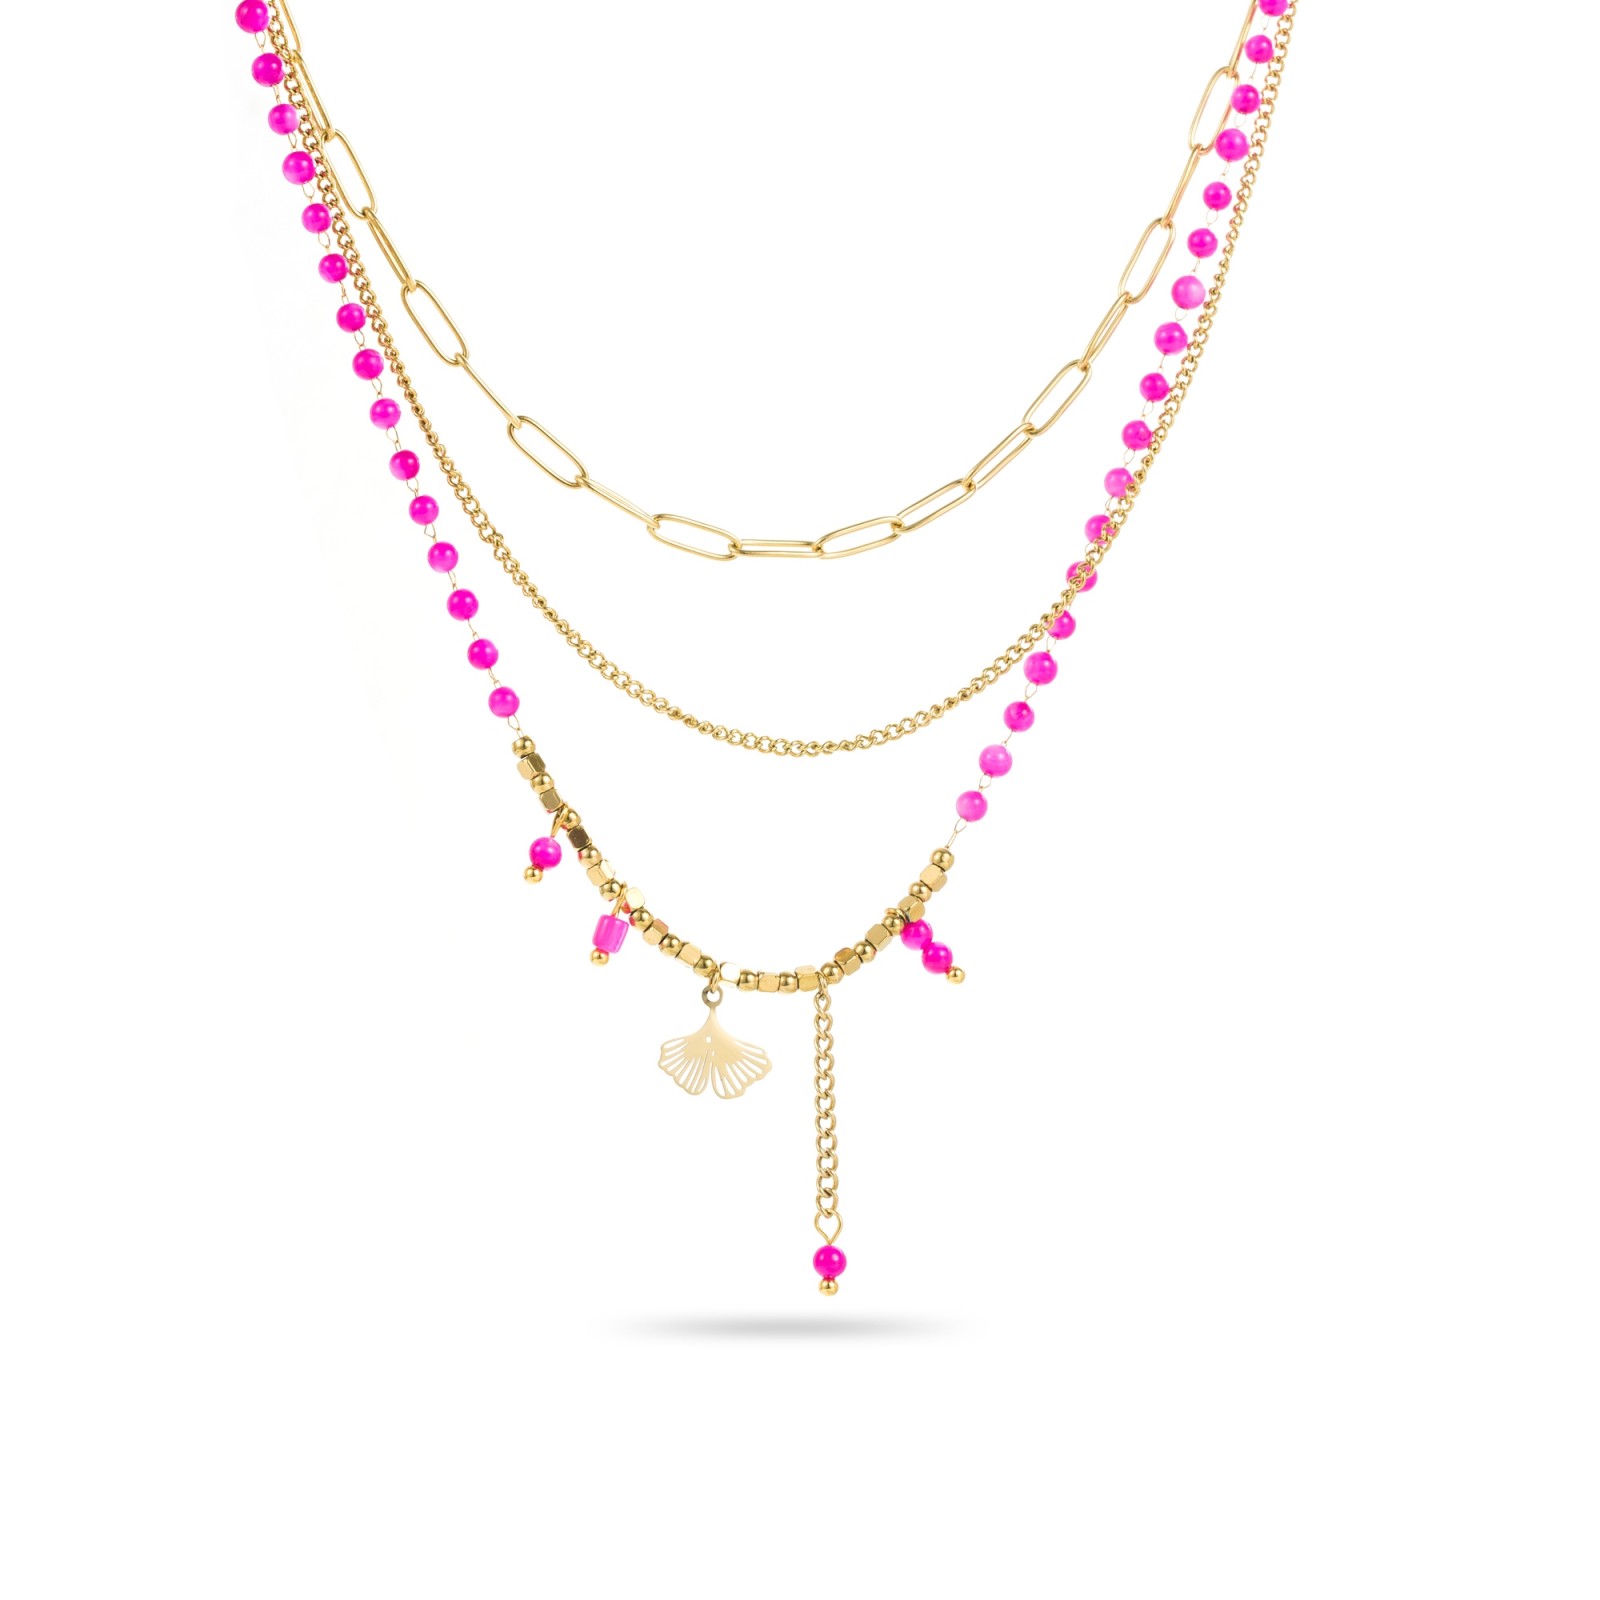 Stainless Steel Short Necklace Color:Fuchsia Pink